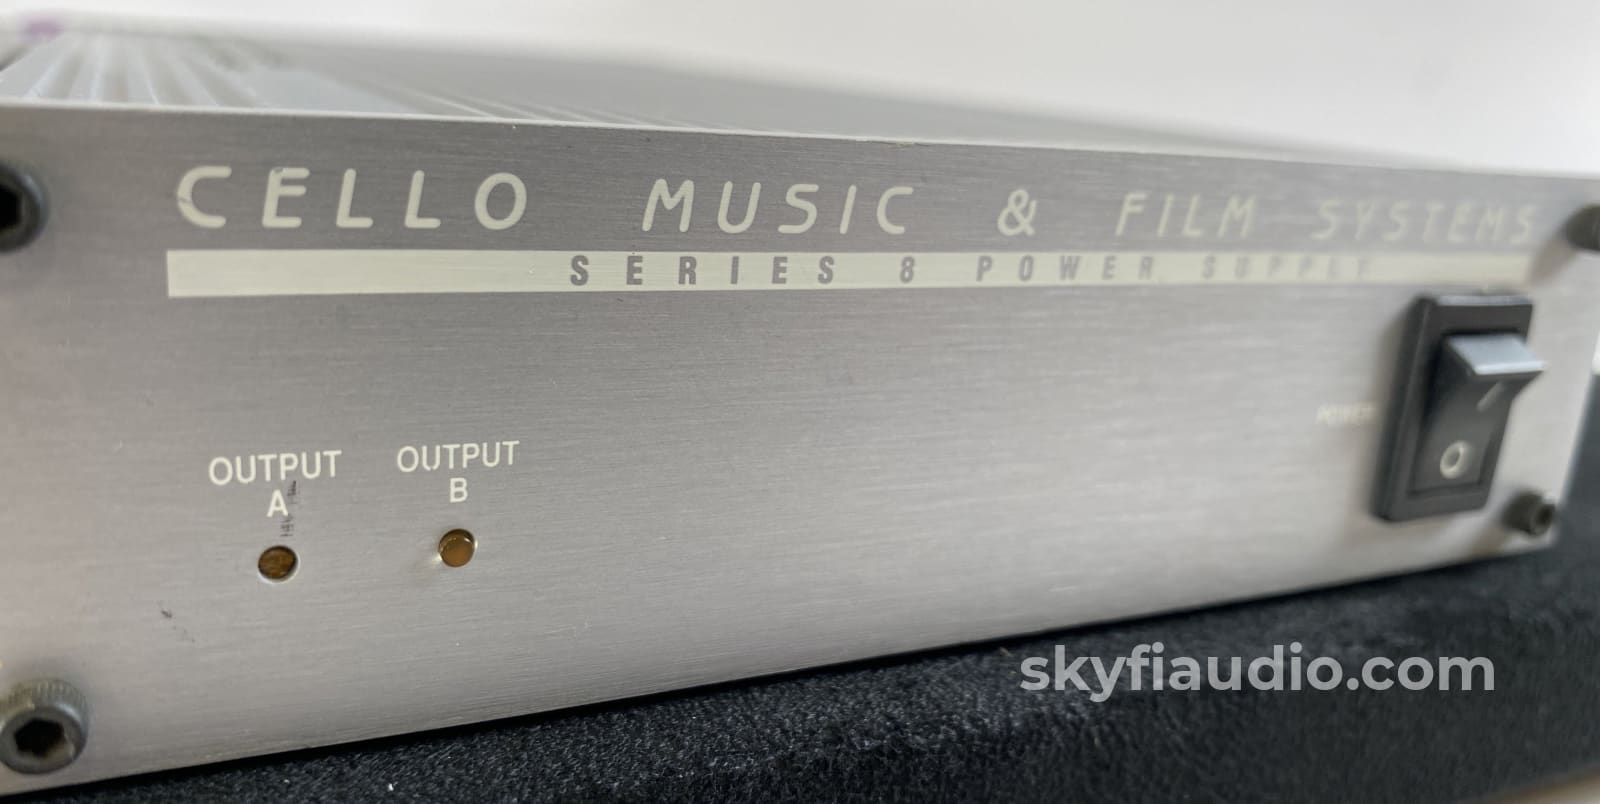 Cello Music And Film Systems Series 8.1 Dac - Rev C With Ps-1000 Power Supply Cd + Digital